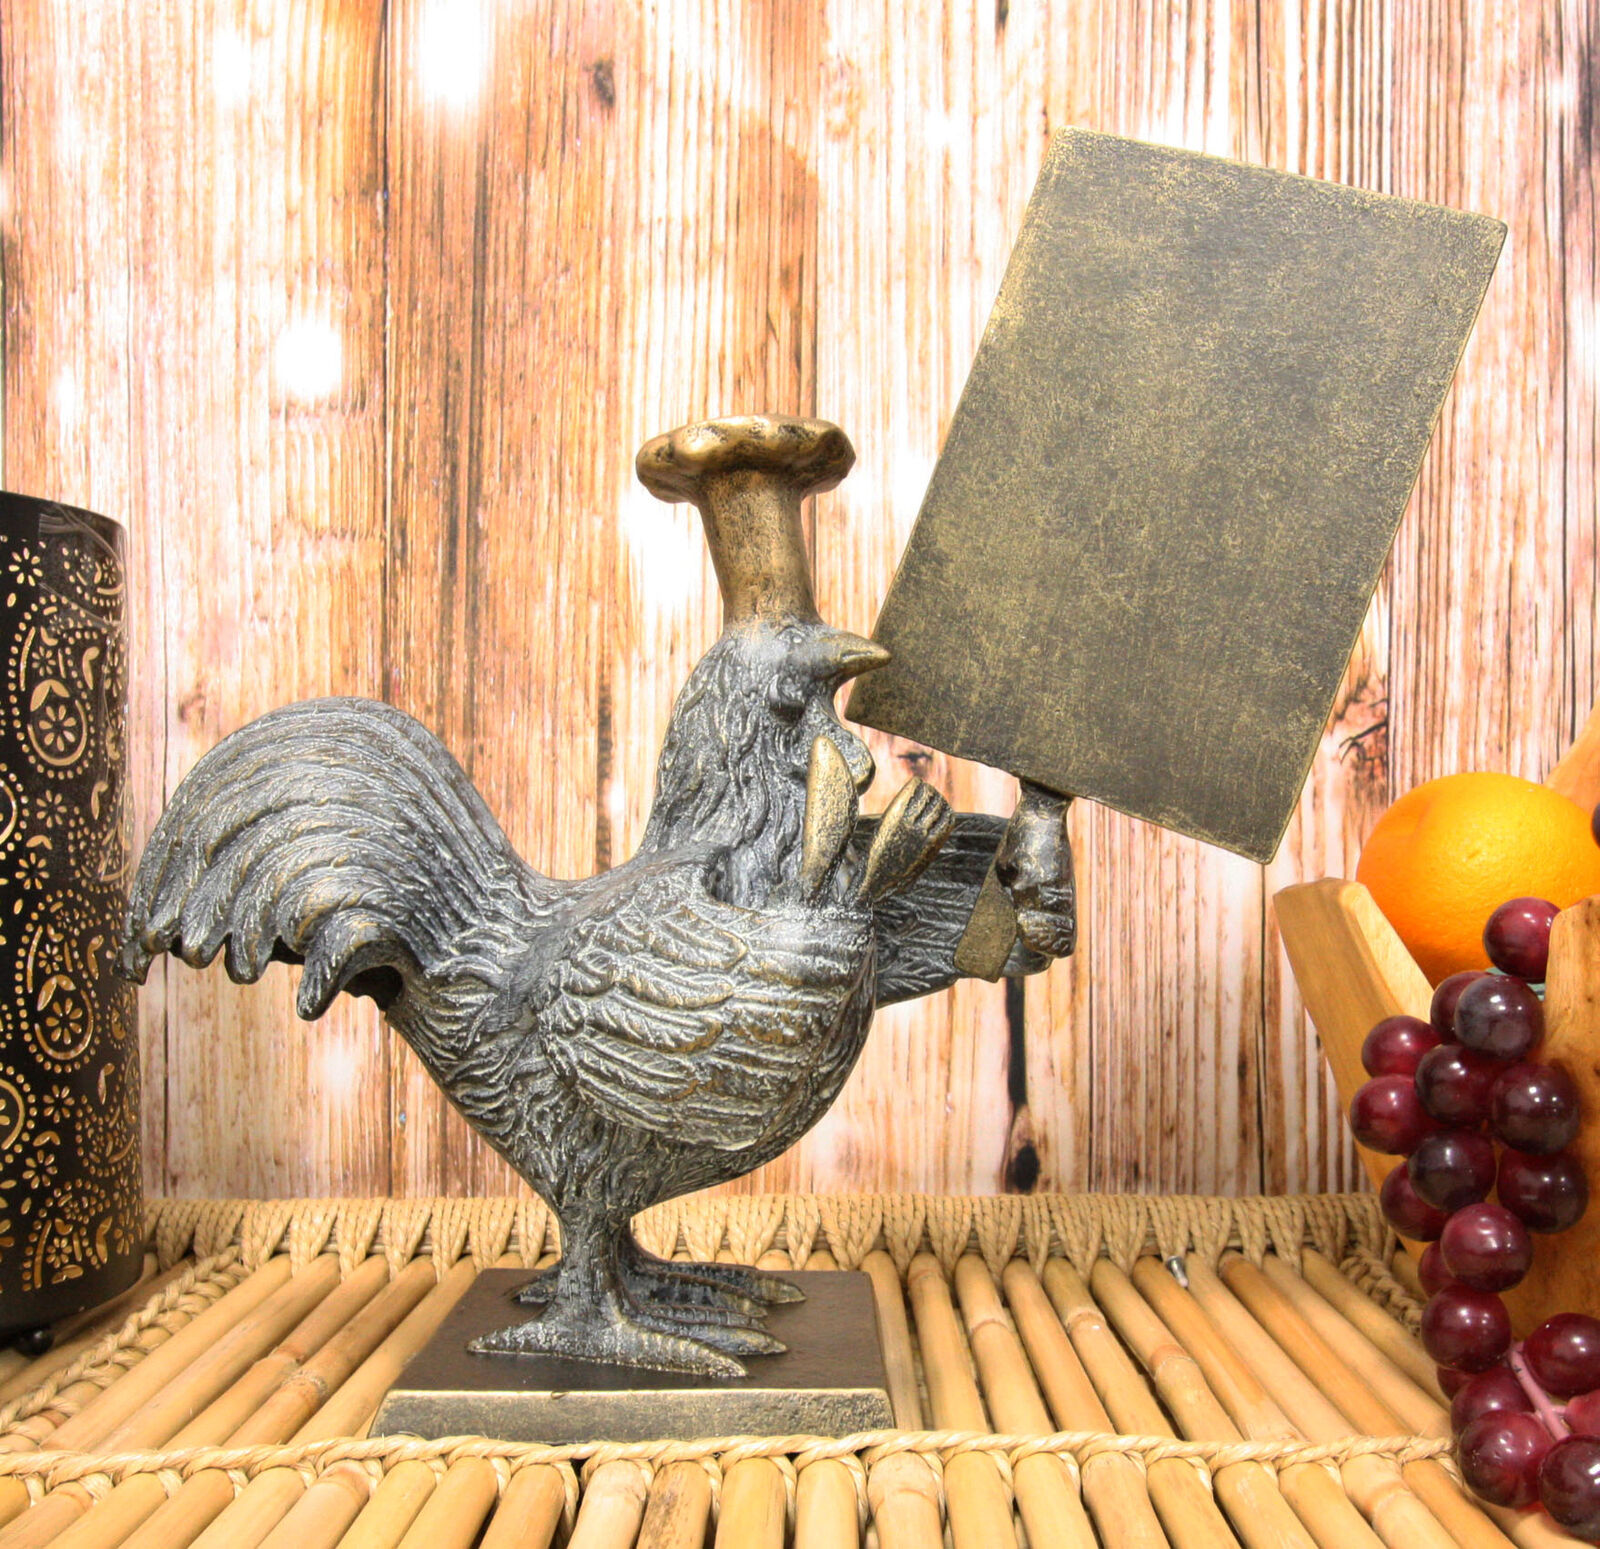 Ebros Rooster with Chef Hat Holding A Menu Board Statue 13.5" Tall Countertop - image 3 of 3